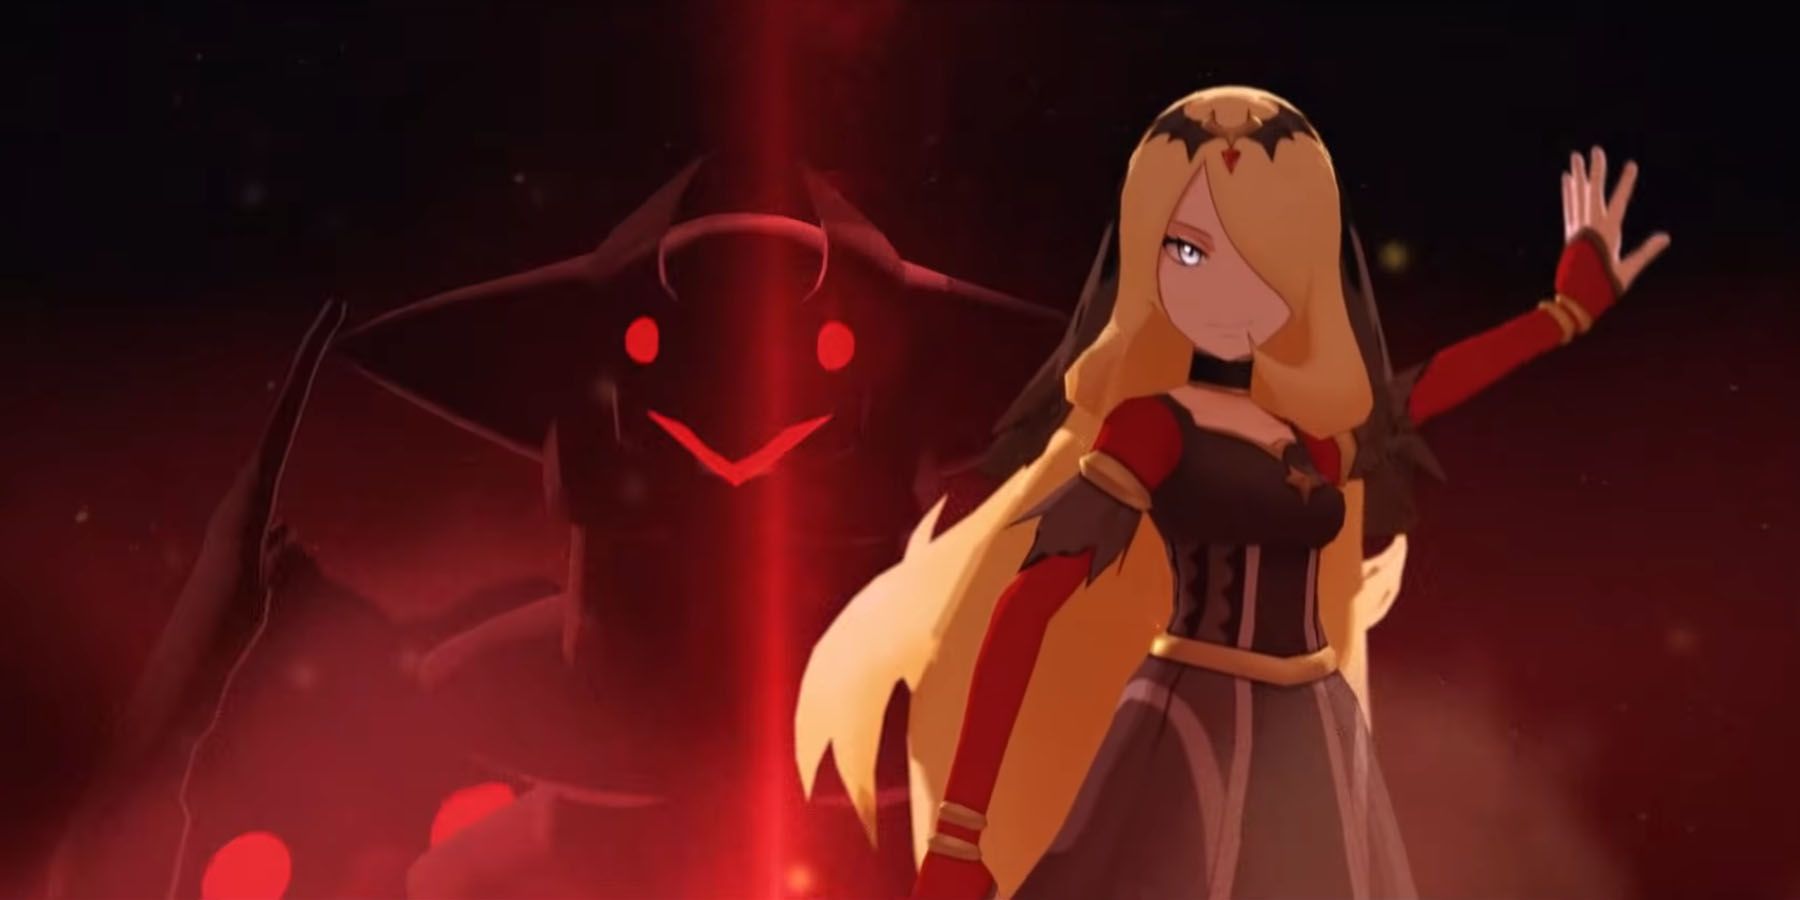 Ash's Showdown With Cynthia Is About To Be The Biggest Battle In Pokemon History